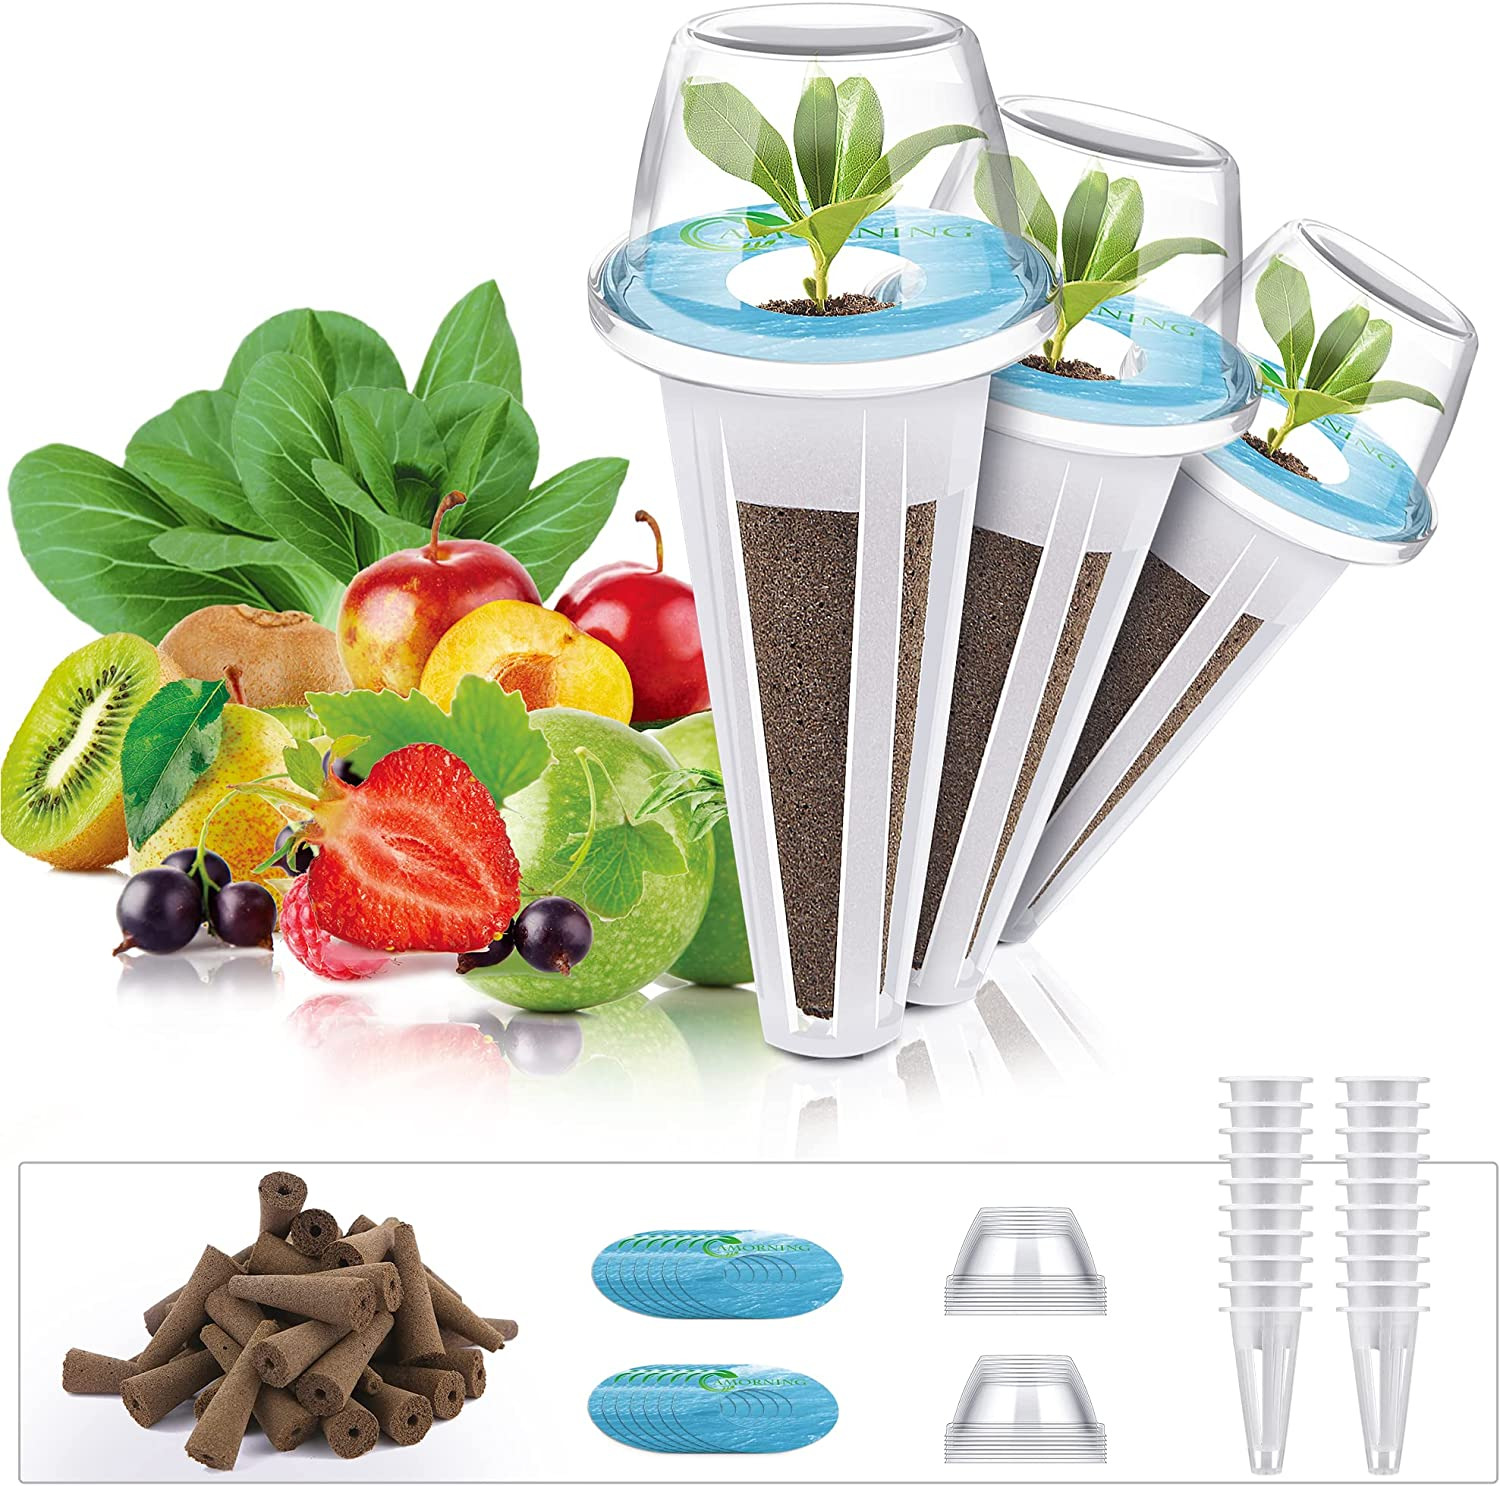 Hydroponic-Garden System Seed-Pods Kit - 15 Grow Domes,15 Pod Labels,15 Grow Bla